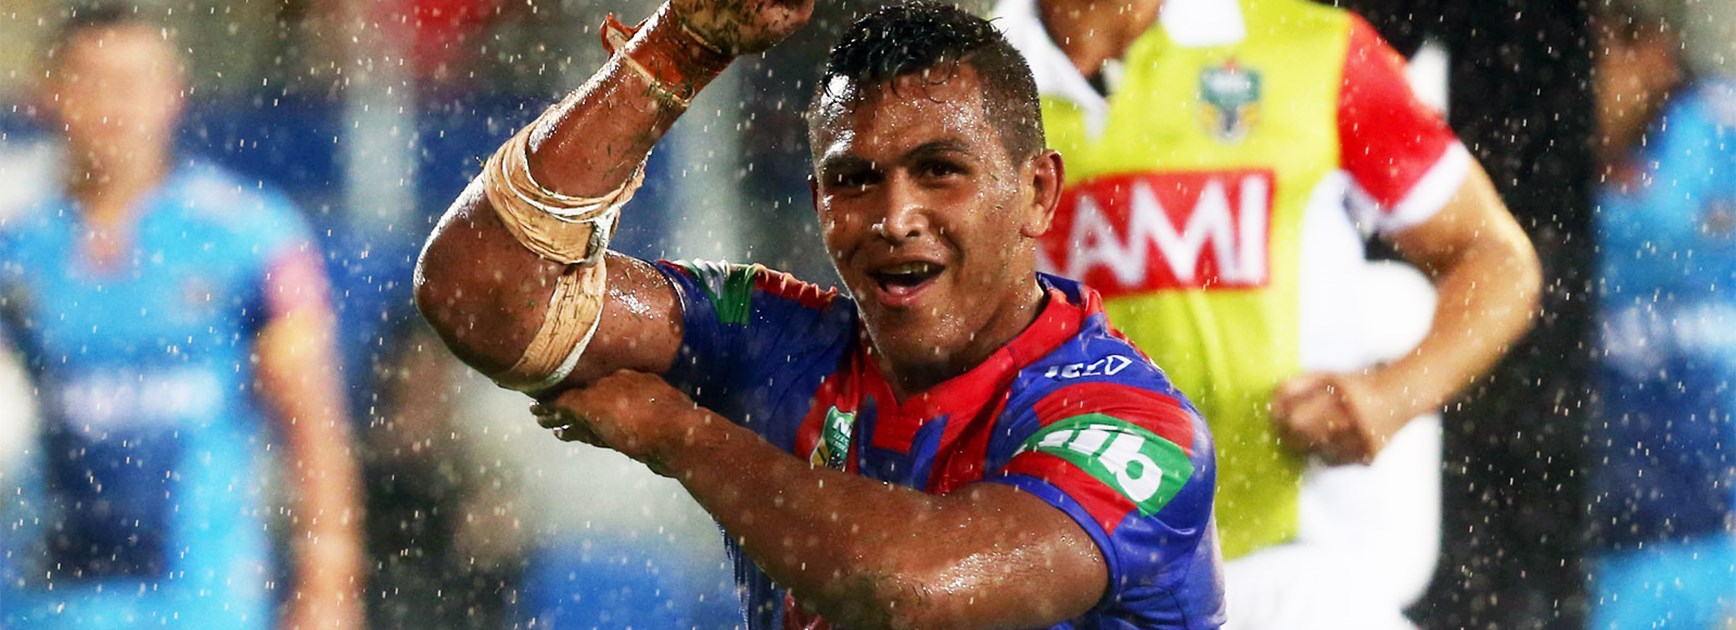 Knights prop Daniel Saifiti scored a try against the Titans in Round 1.